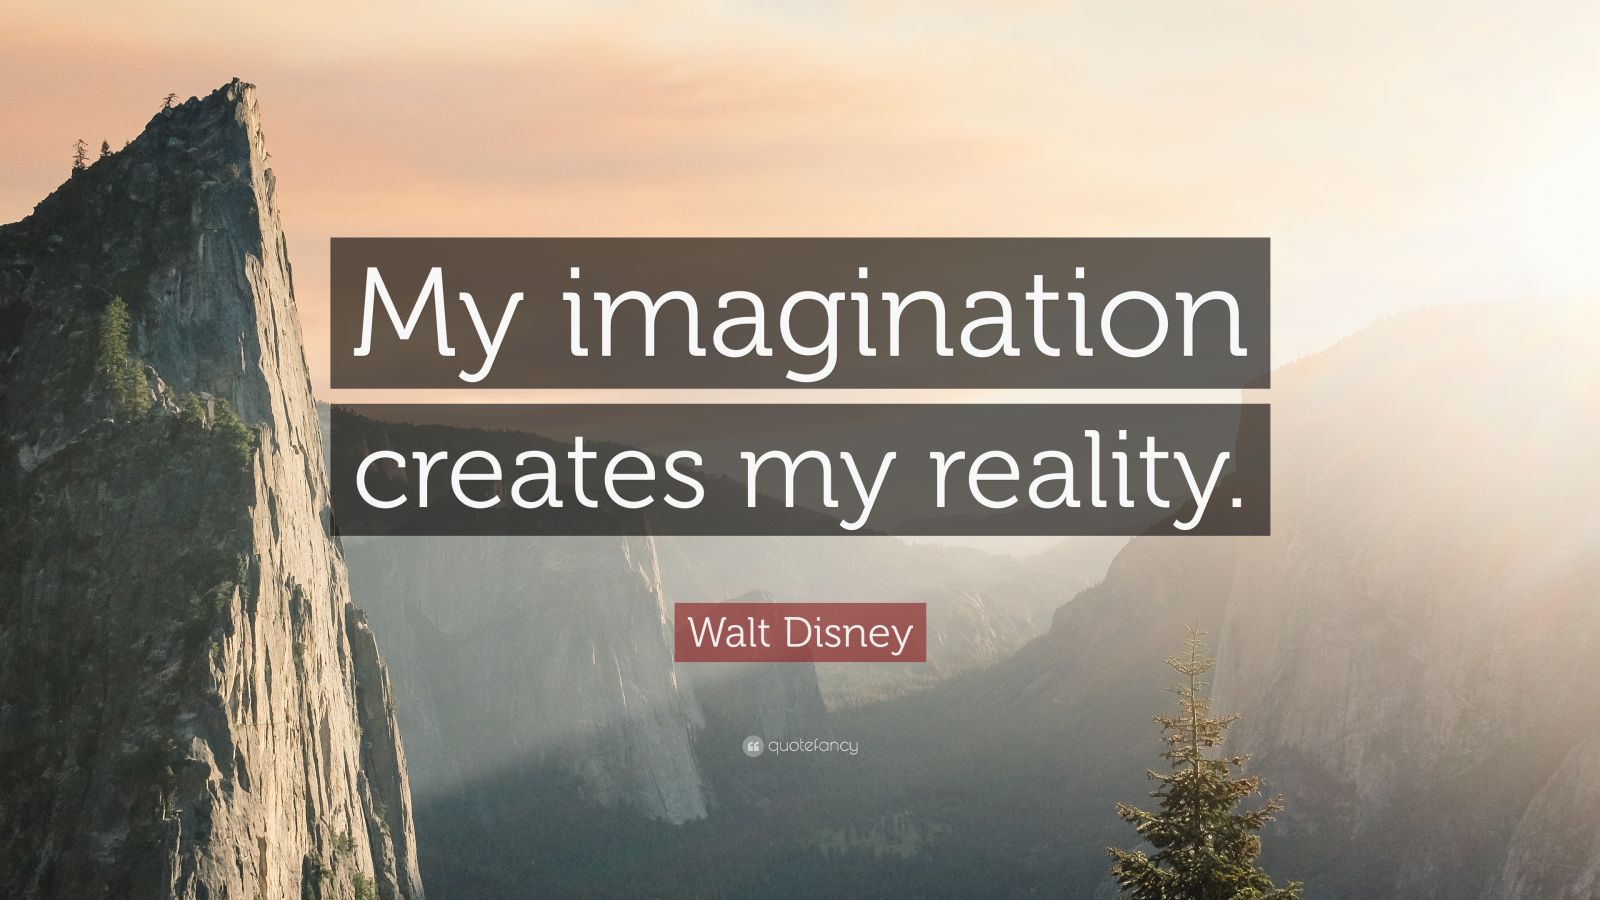 Walt Disney Quote: “My imagination creates my reality.” (12 wallpapers